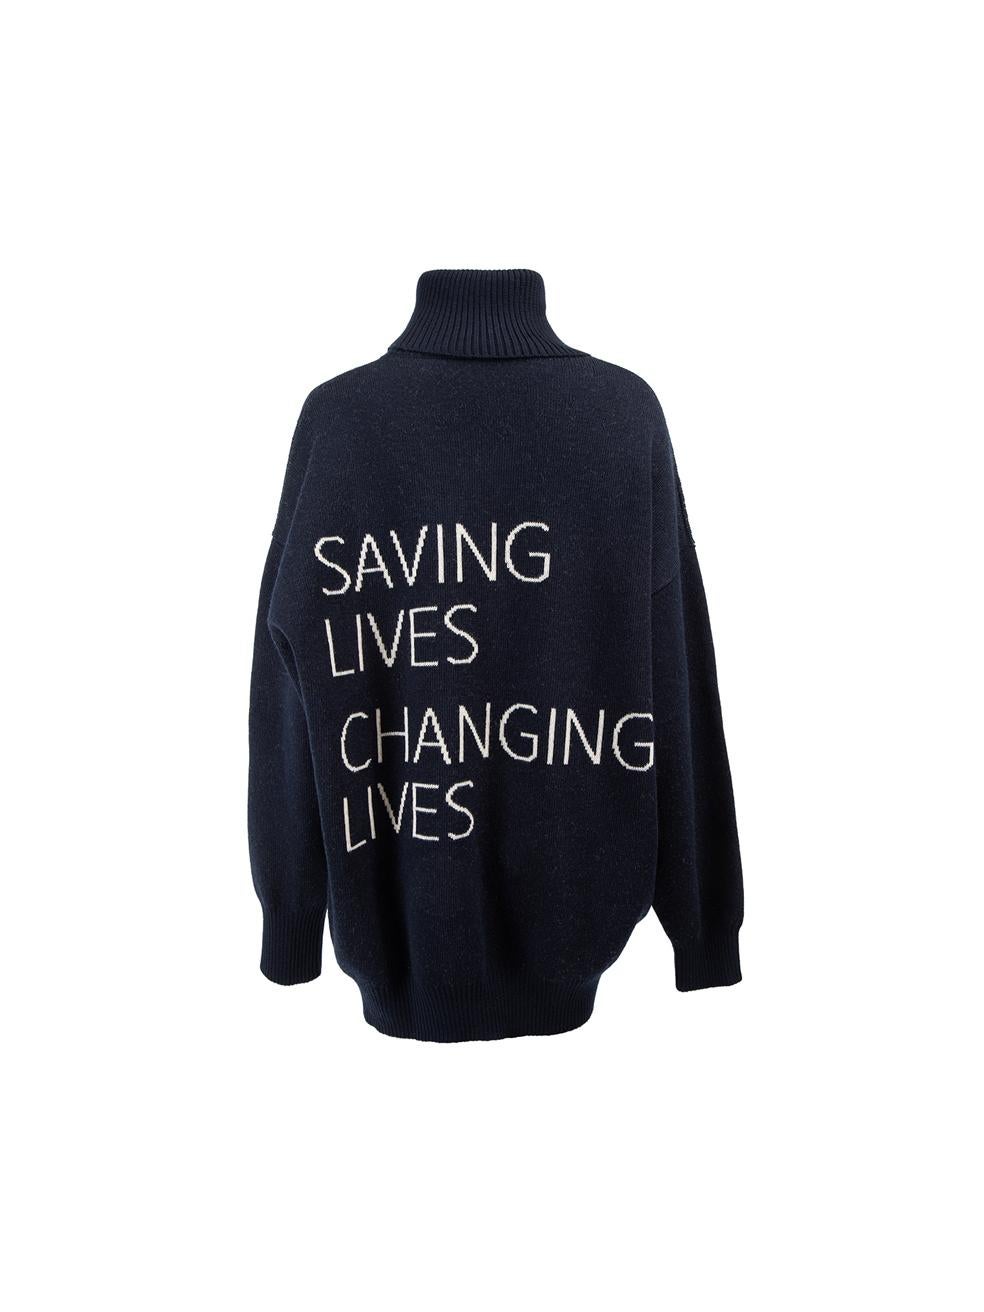 Balenciaga Navy Wool Saving Lives Changing Lives Knitted Jumper Size M In Good Condition For Sale In London, GB